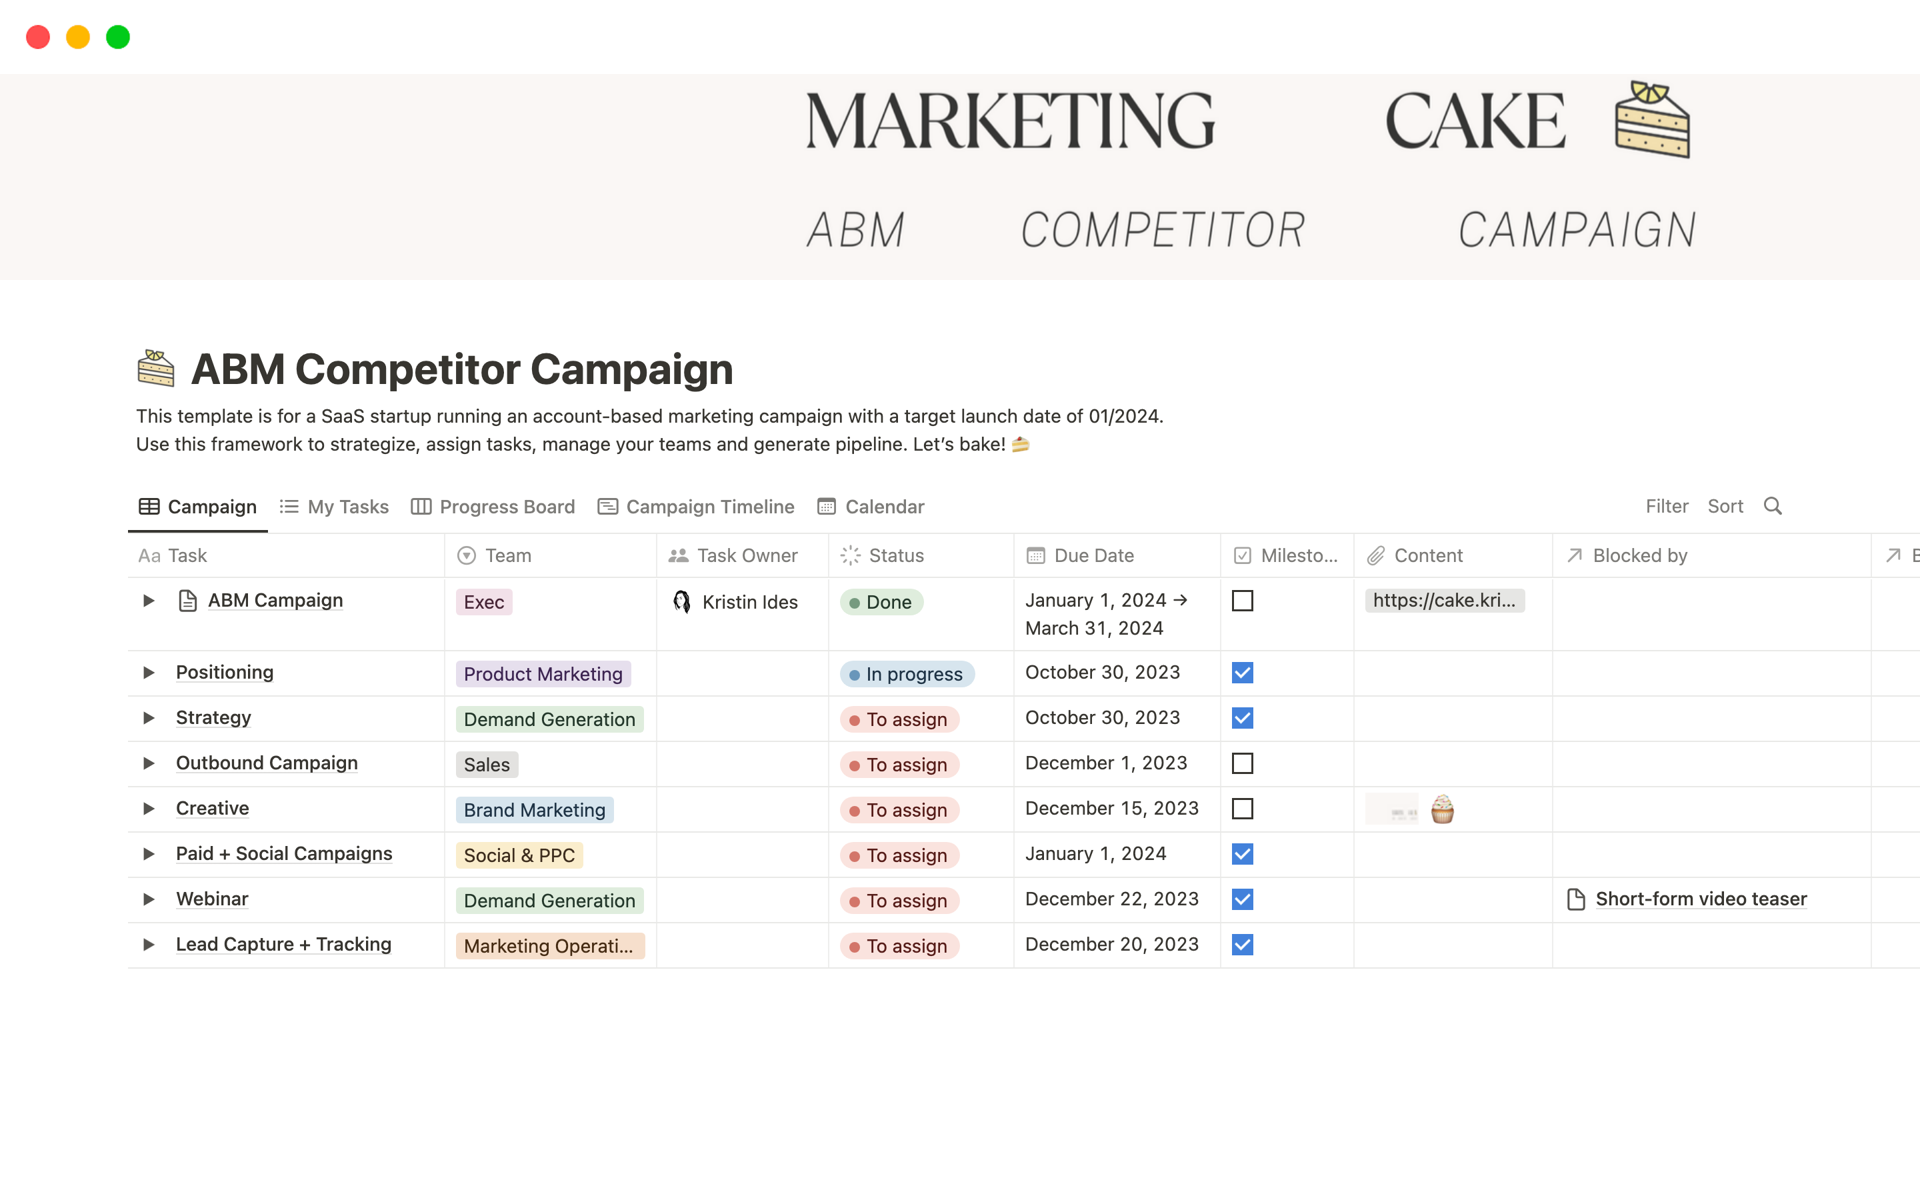 Strategize, plan and execute your next ABM competitor campaign with this free template from Marketing Cake.